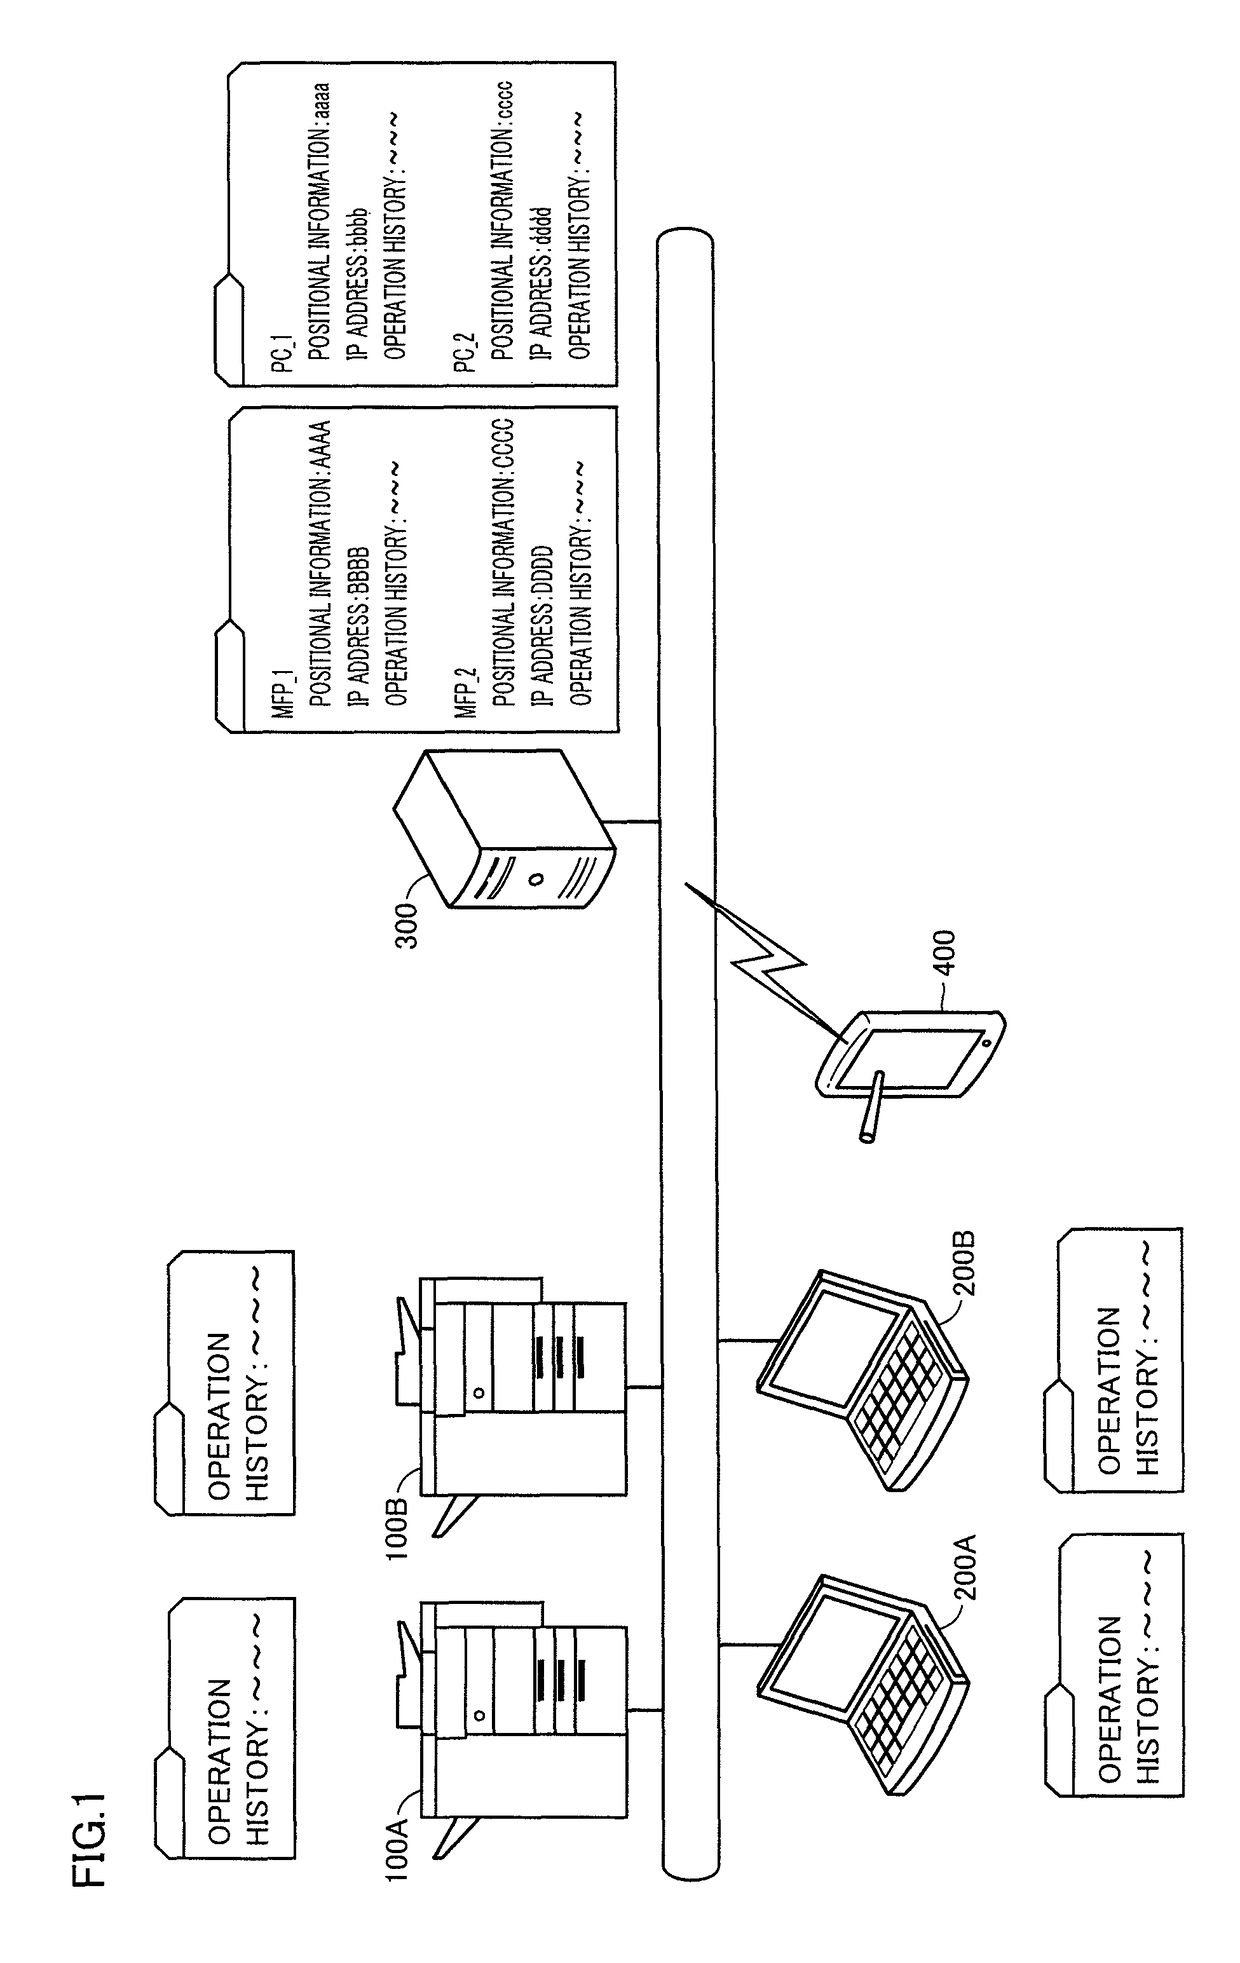 Image processing system with ease of operation